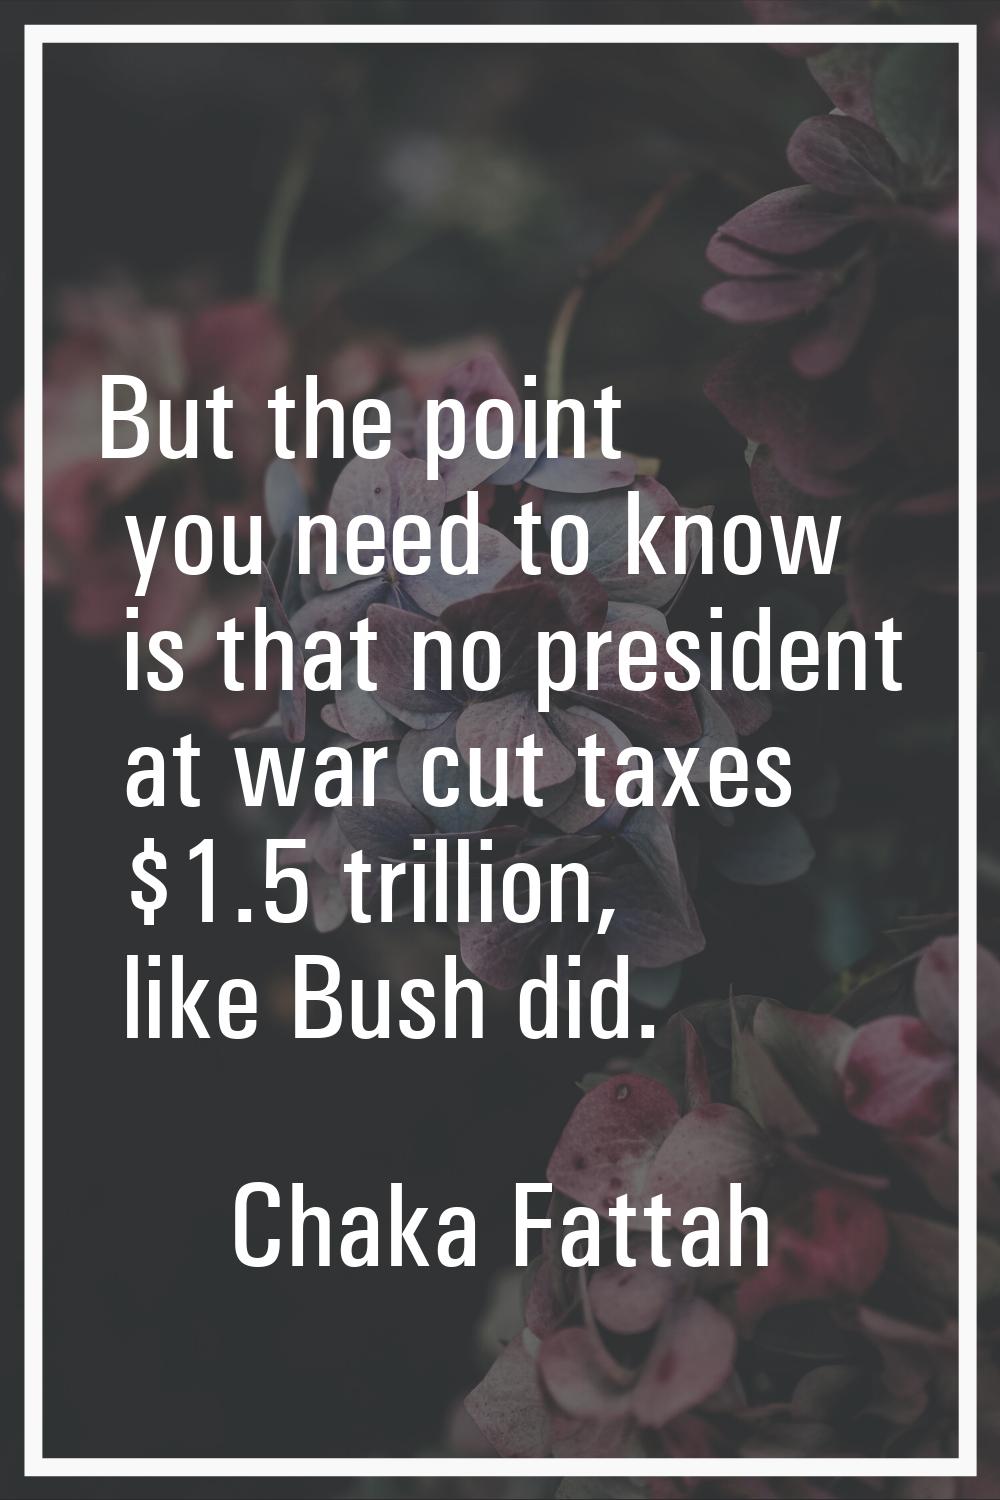 But the point you need to know is that no president at war cut taxes $1.5 trillion, like Bush did.